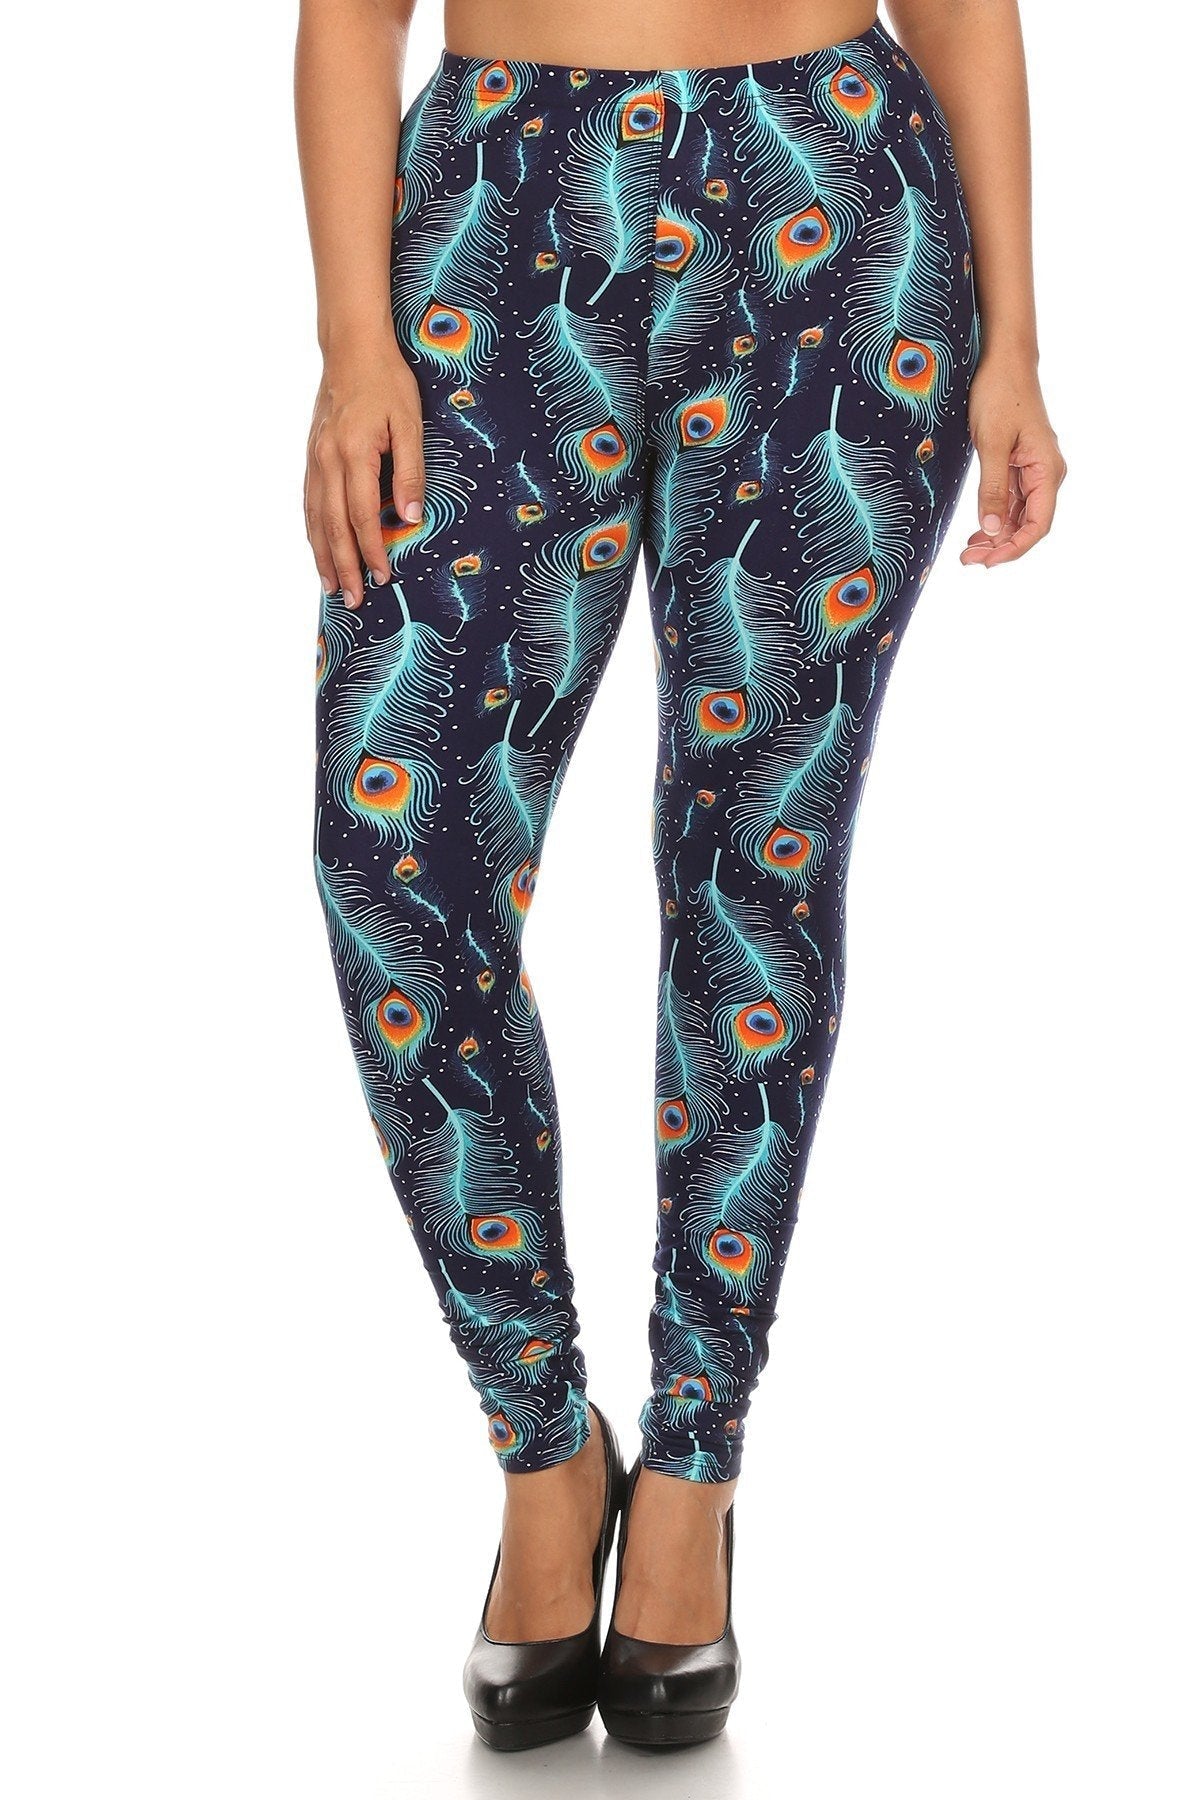 Plus Size Print, Full Length Leggings In A Slim Fitting Style With A Banded High Waist Women's Clothing jehouze 